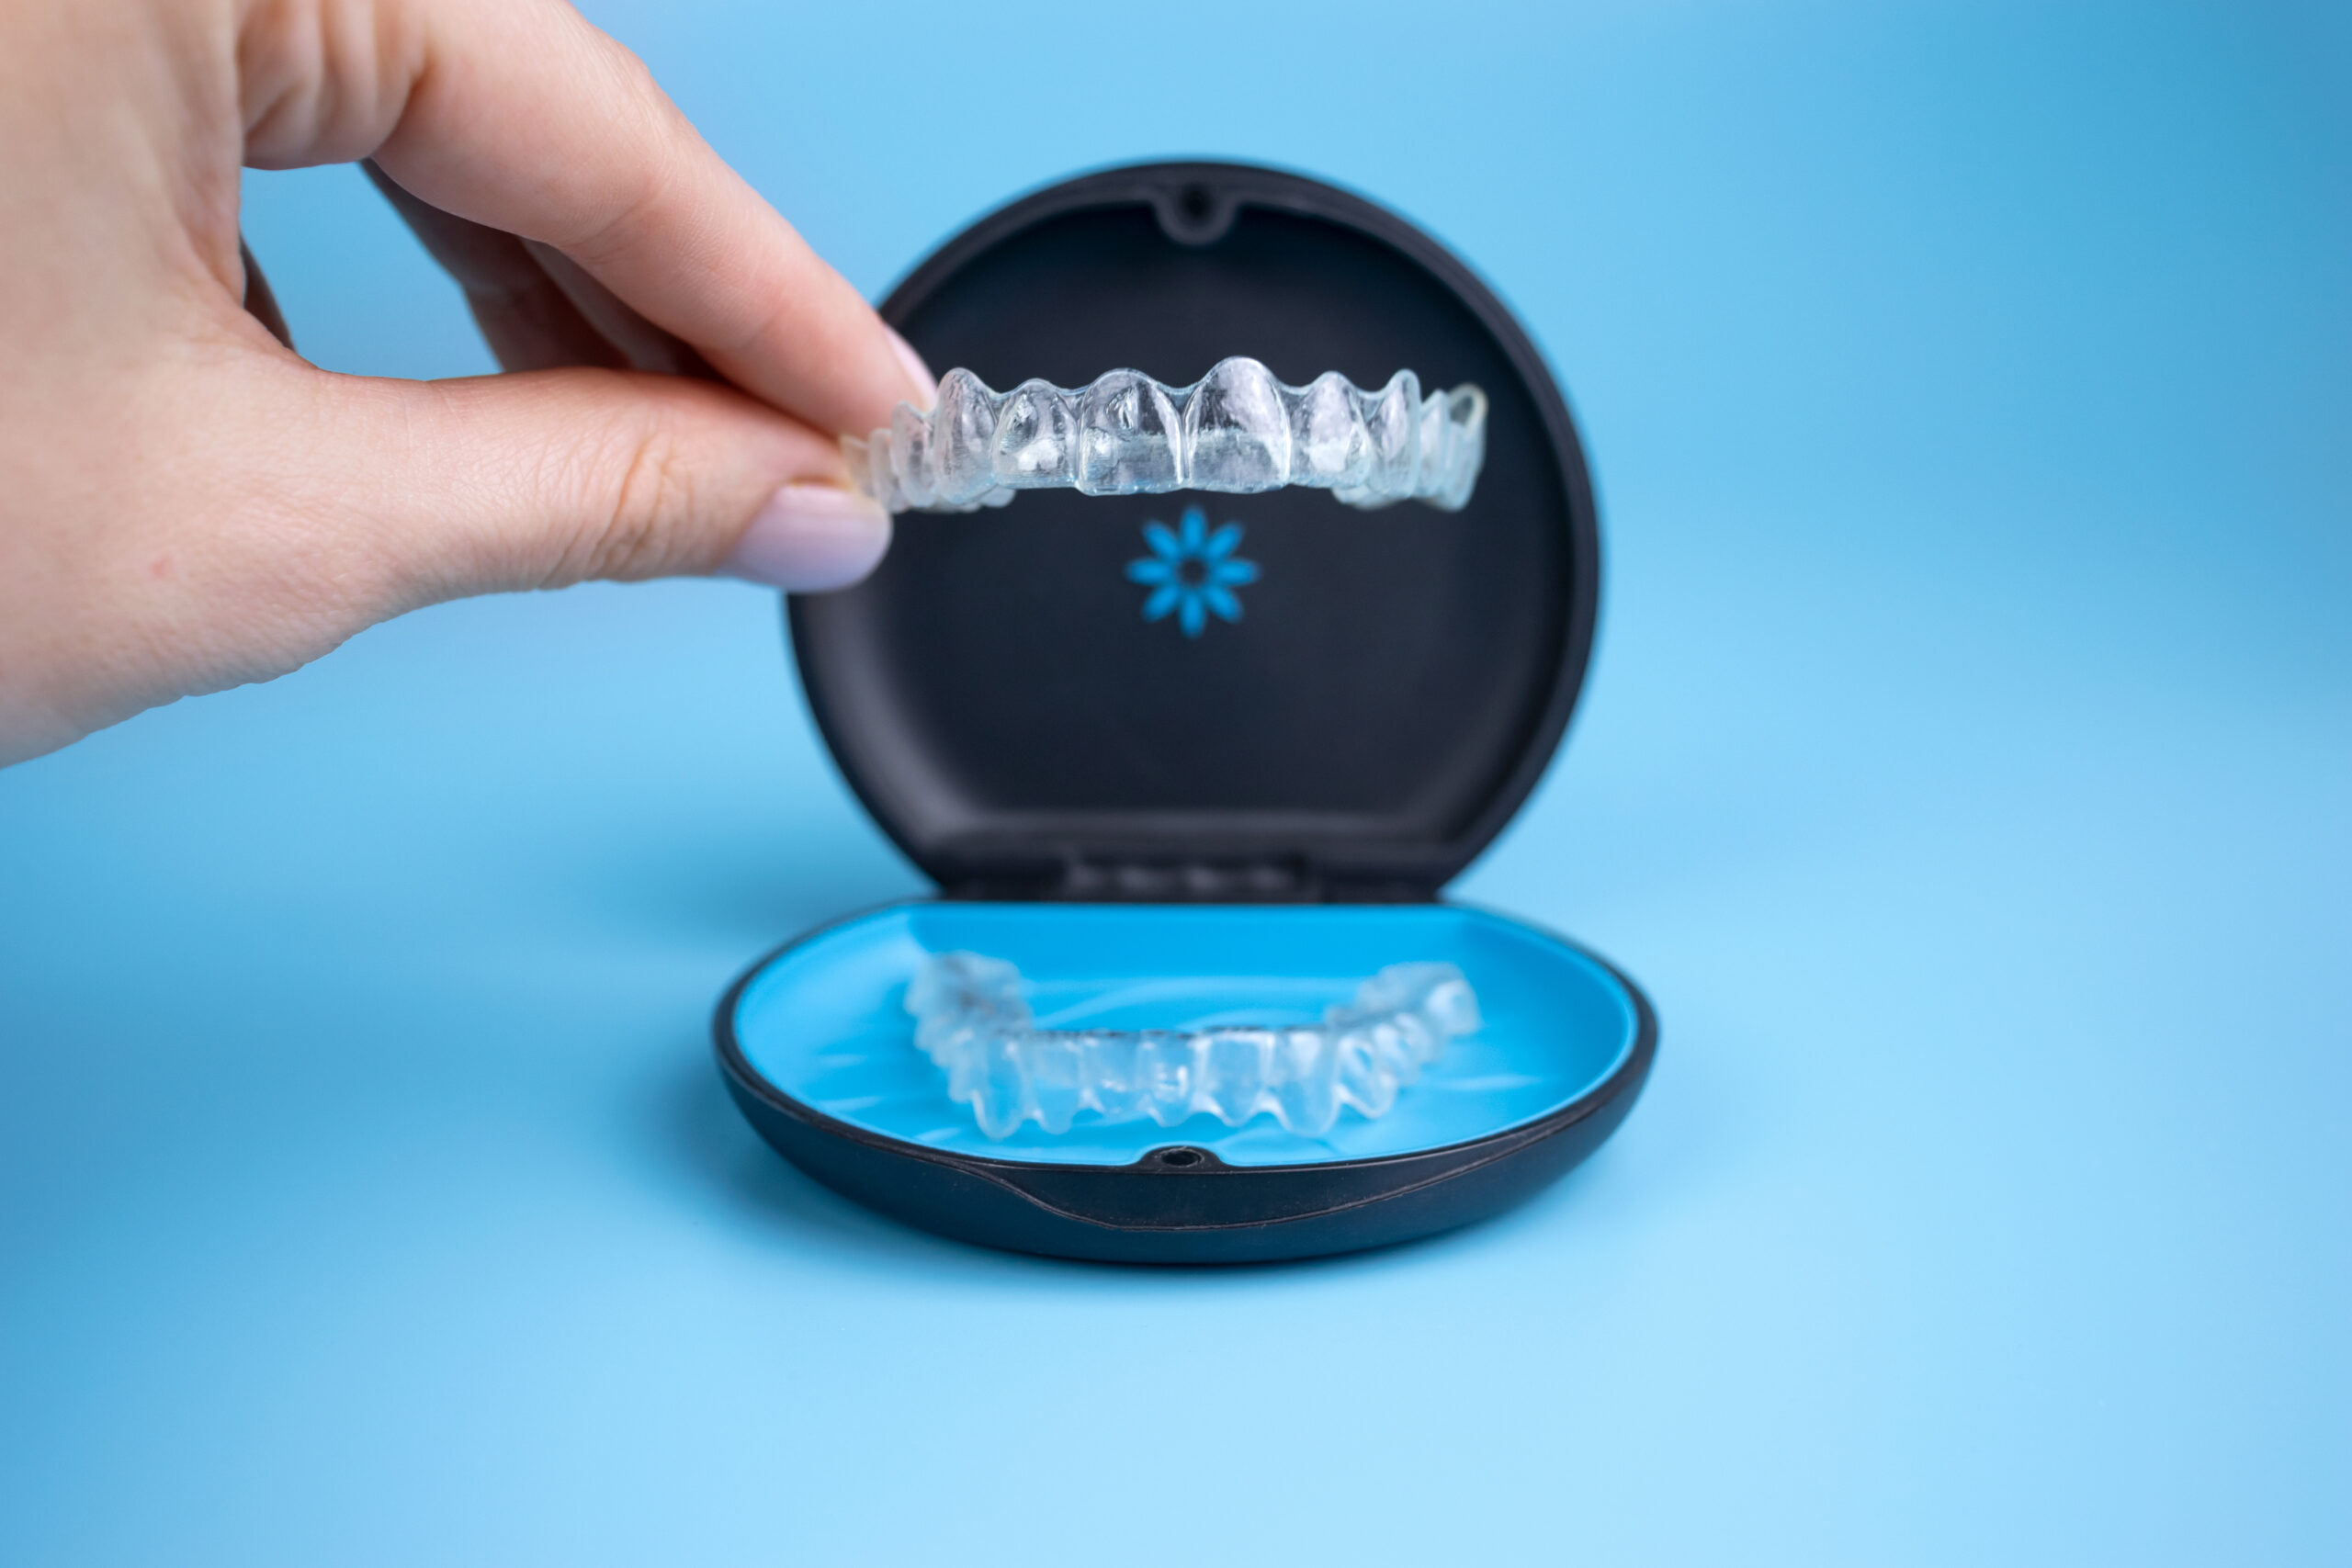 Woman holding invisalign transparent retainers with a box on the table, flatlay top view. Selective focus.